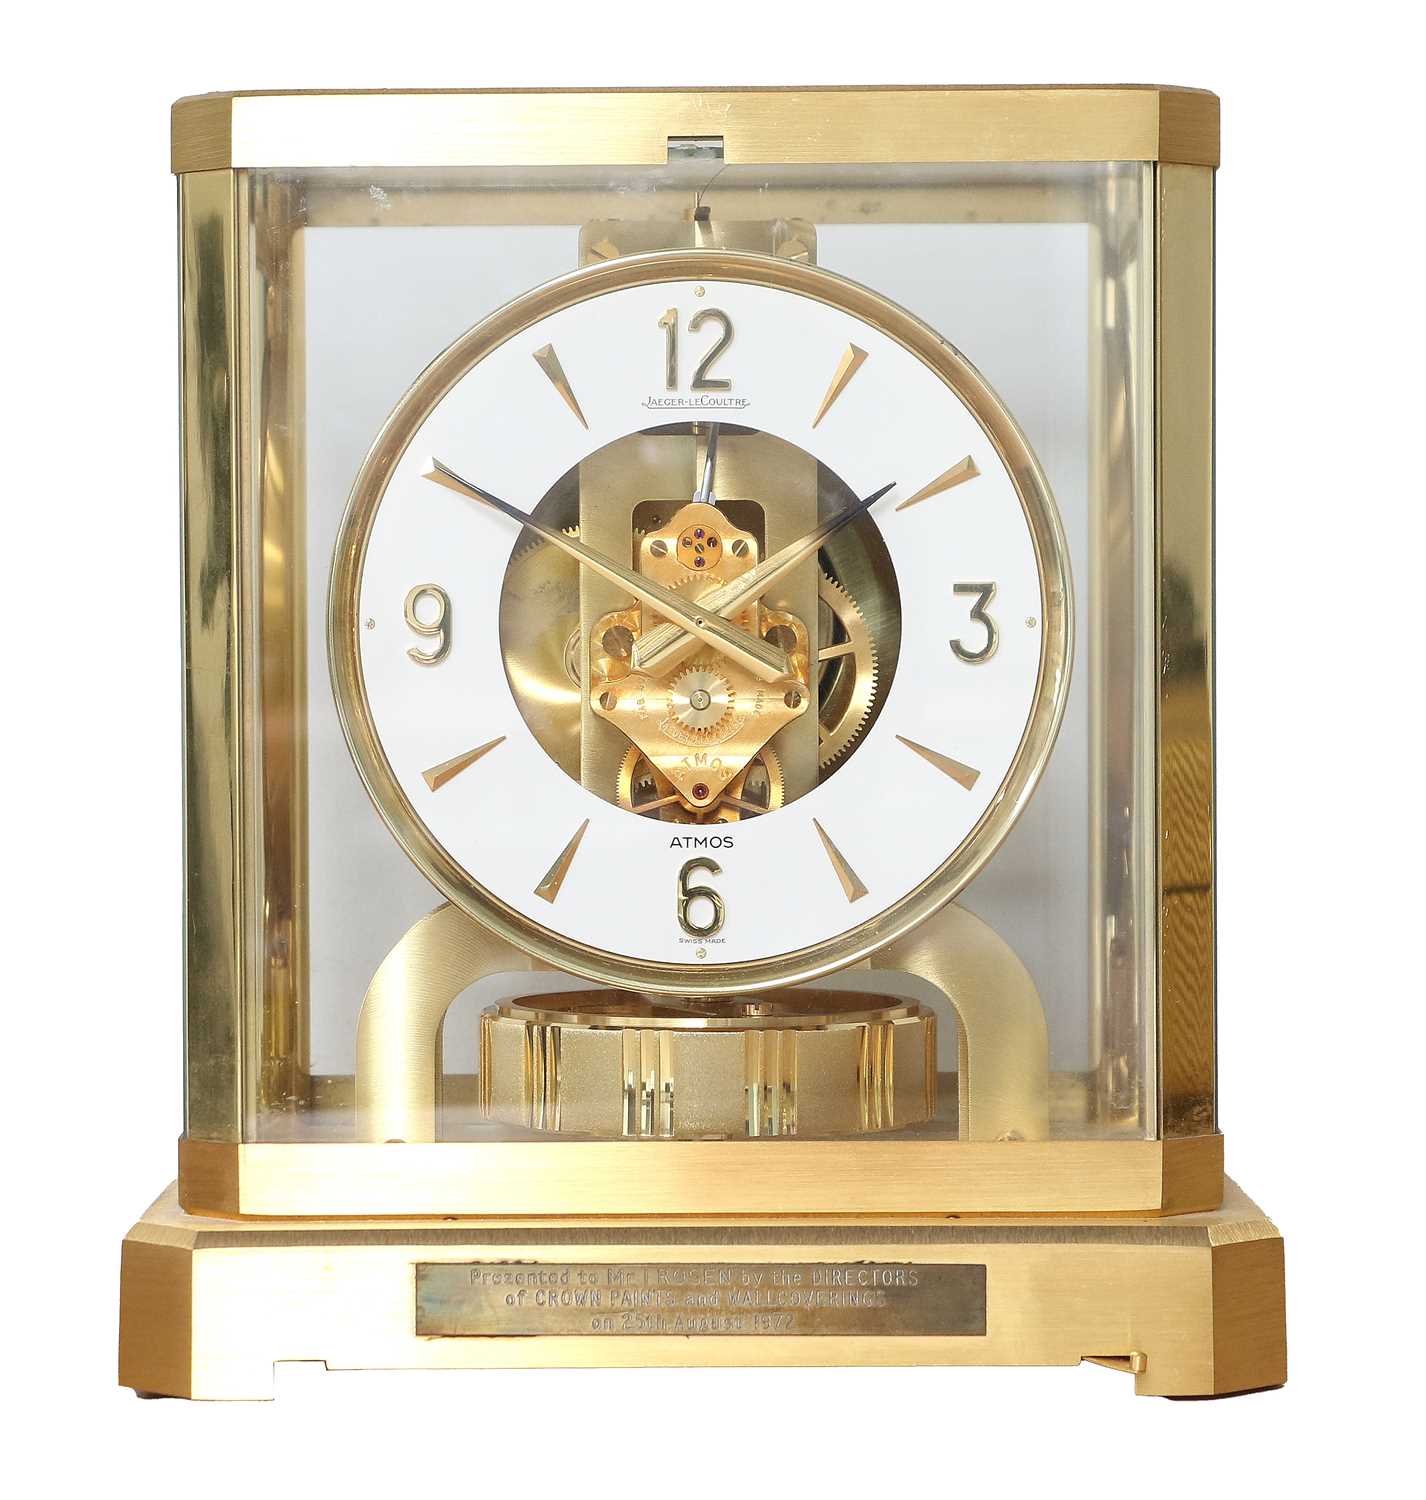 A Brass Atmos Clock, signed Jaeger LeCoultre, 20th Century, case with glass panels, front of the - Image 3 of 6